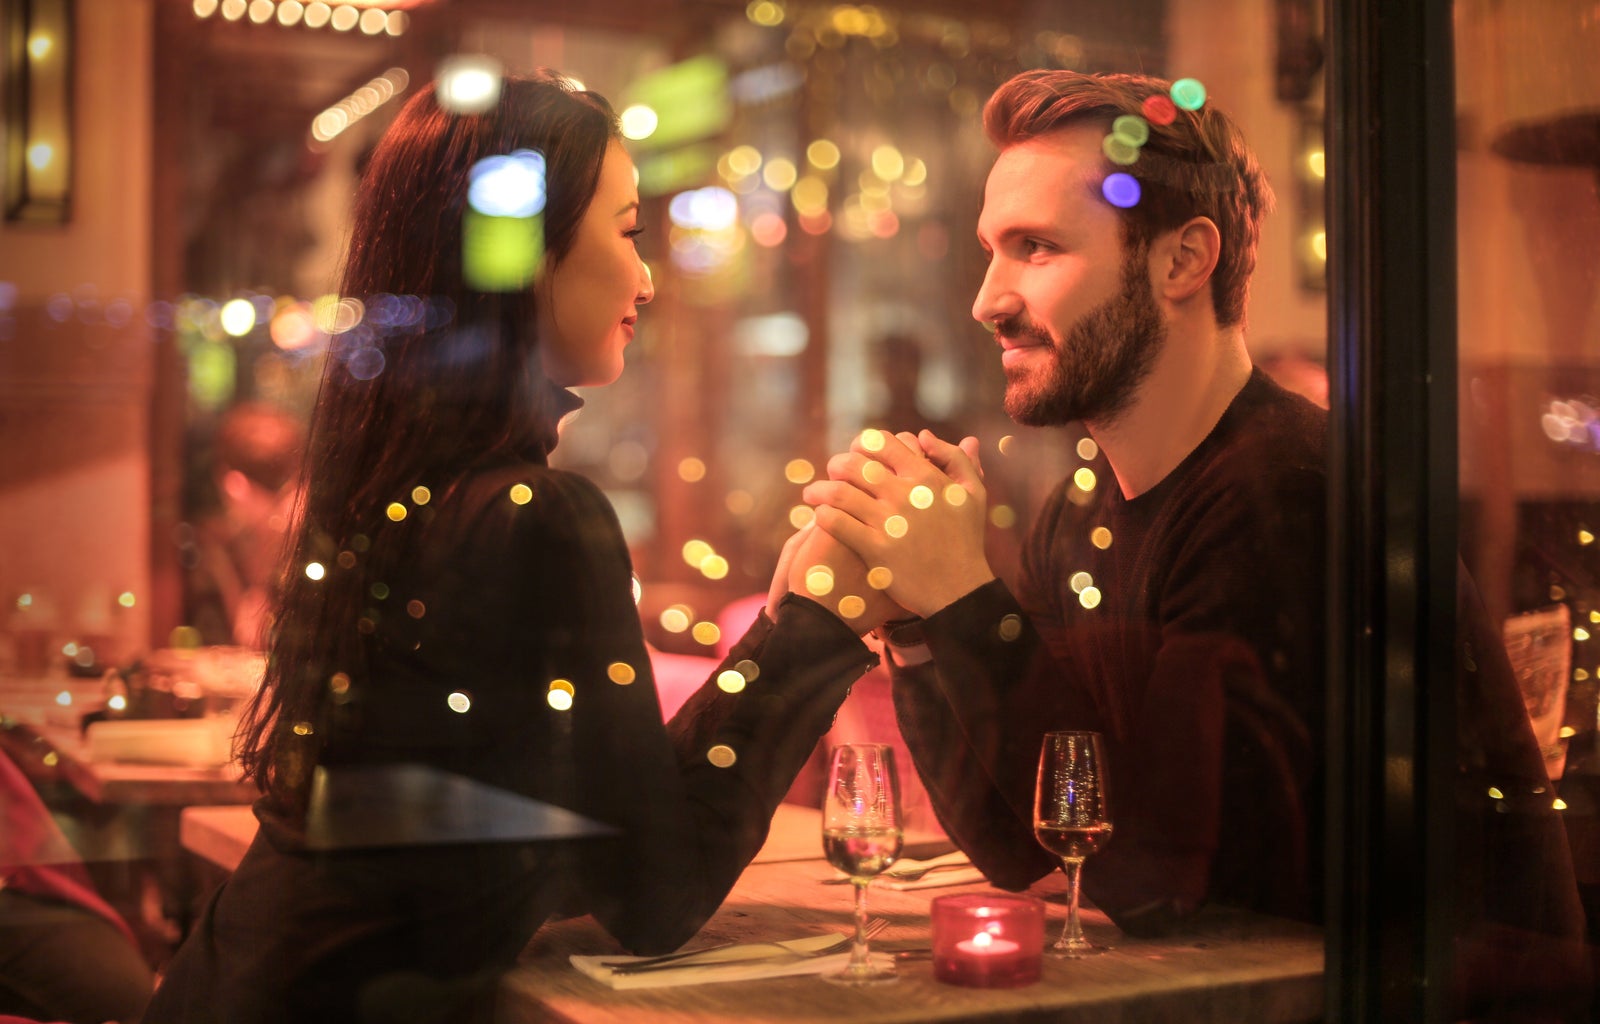 couple seen holding hands through the window at a table with two glasses of wine on the table